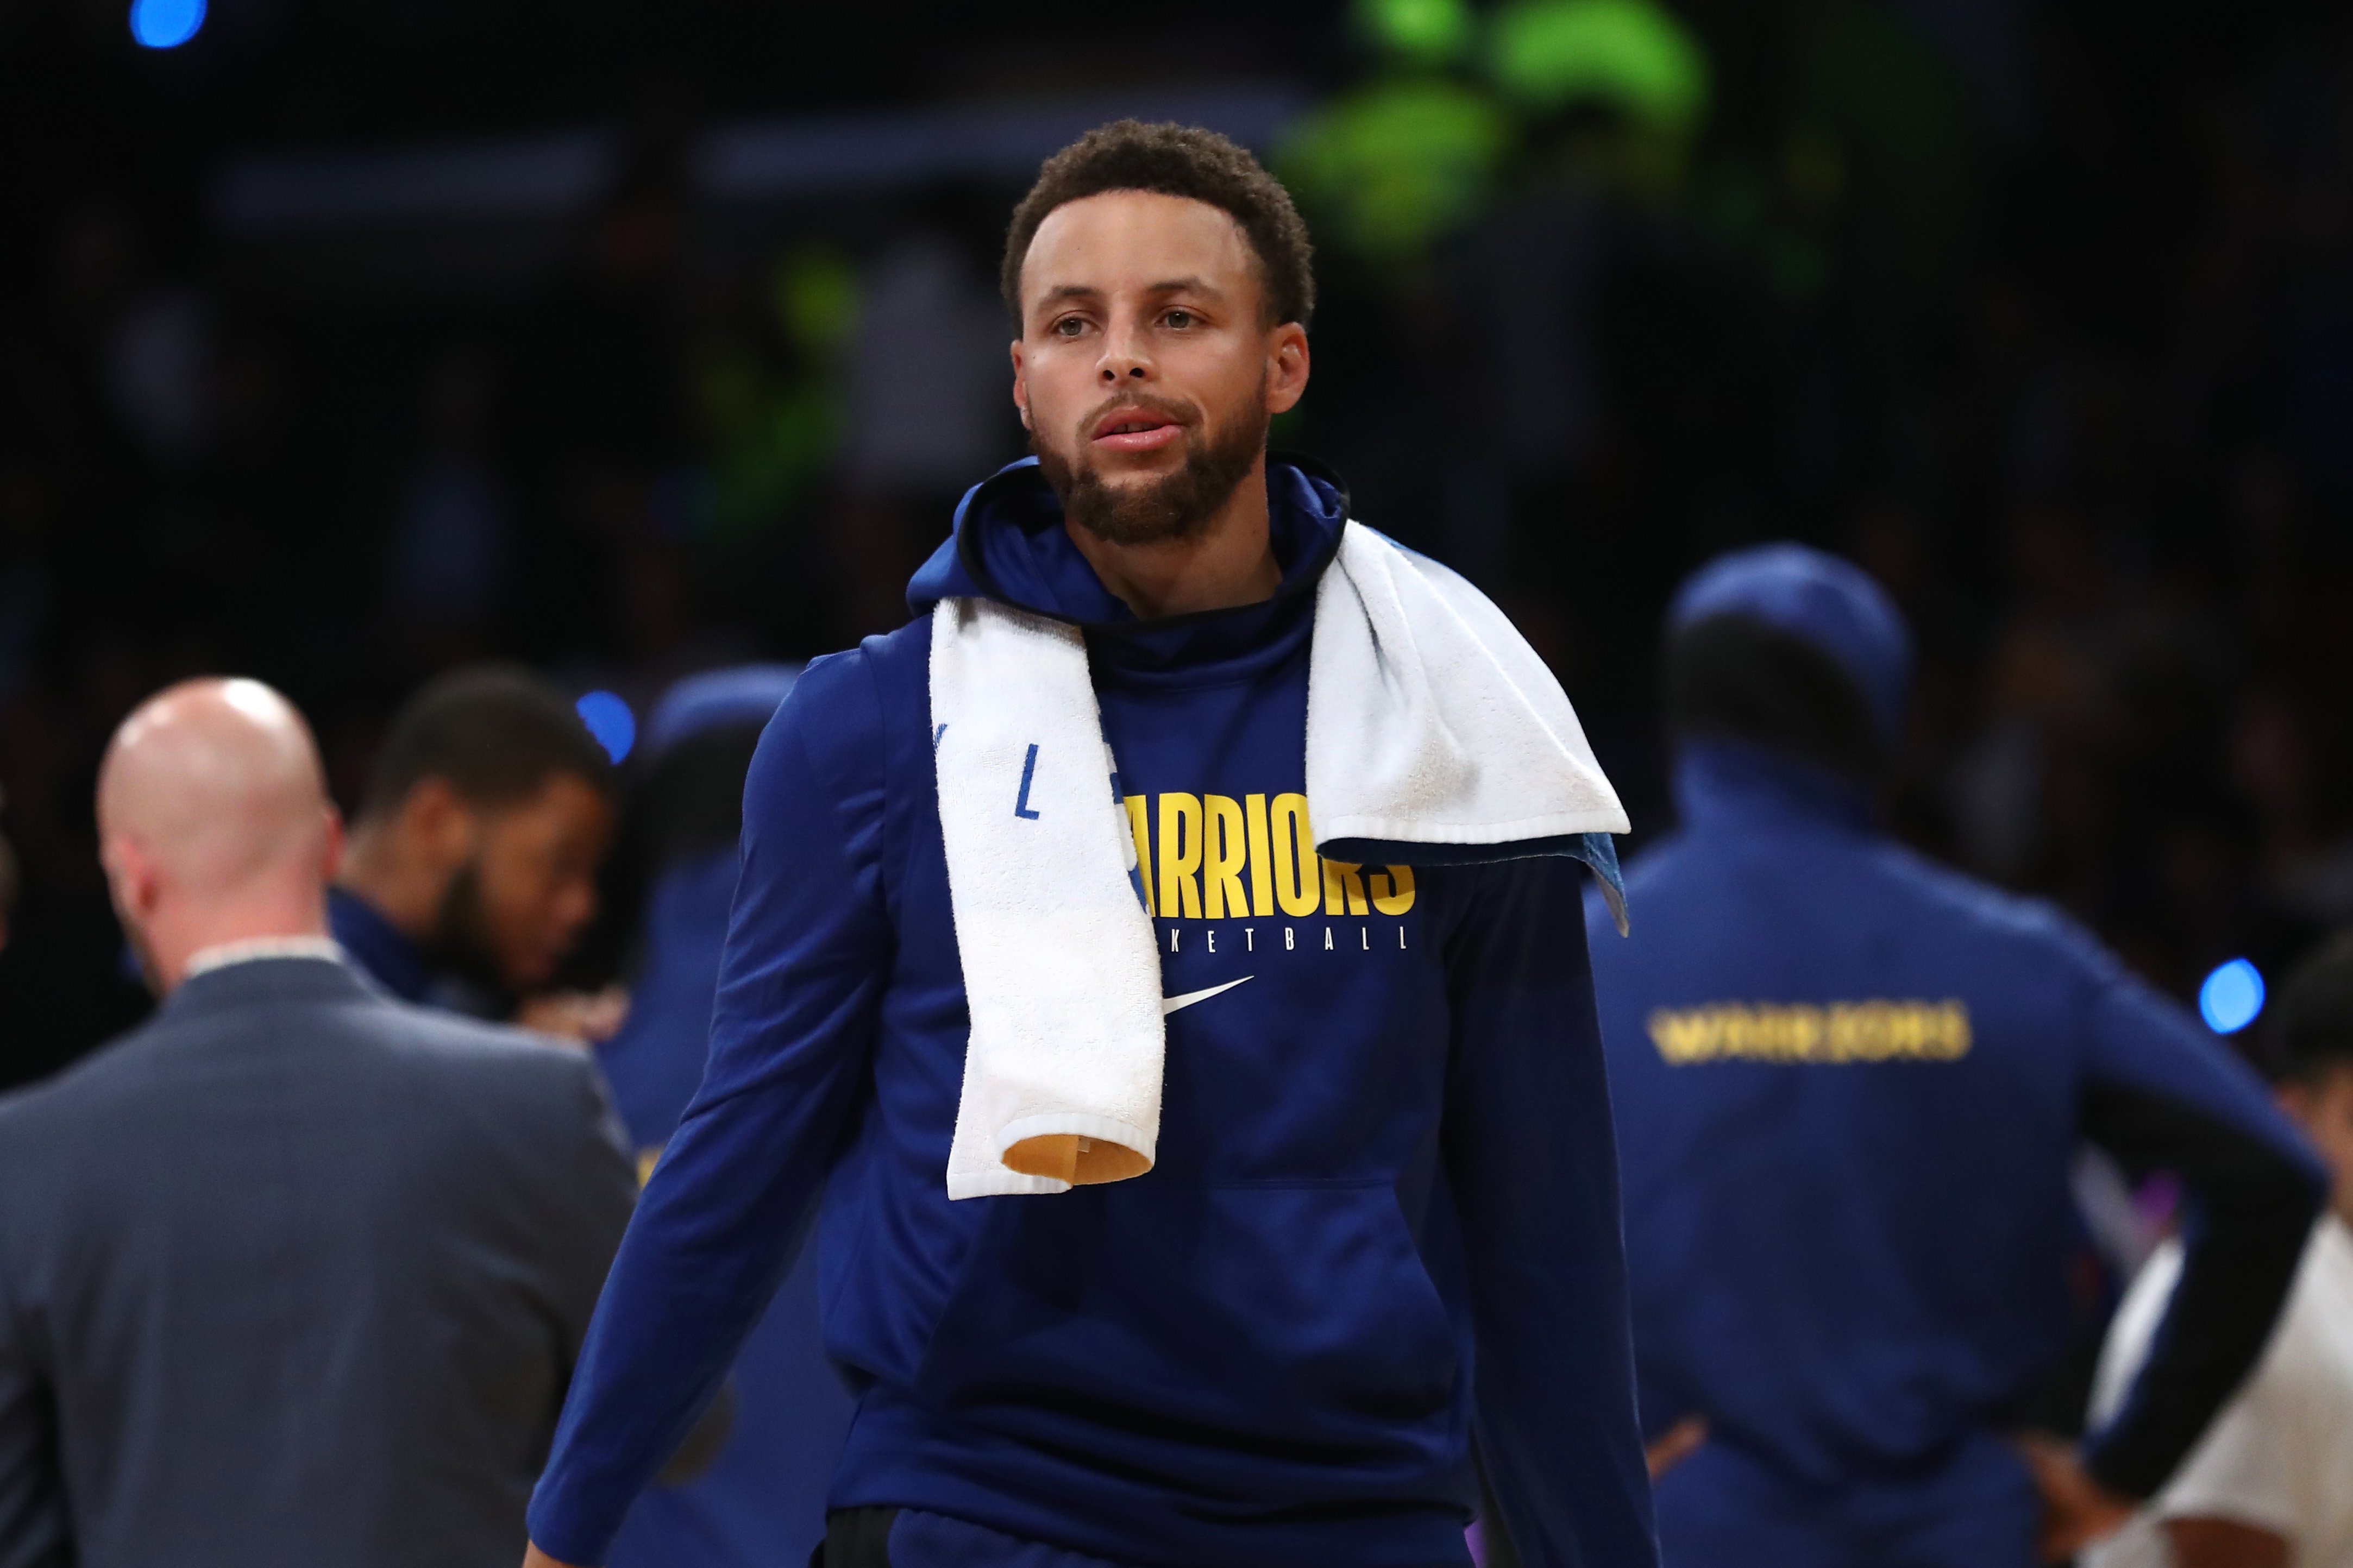 Stephen Curry #30 of the Golden State Warriors during a game against the Los Angeles Lakers on Oct. 16, 2019 in California | Photo: Getty Images